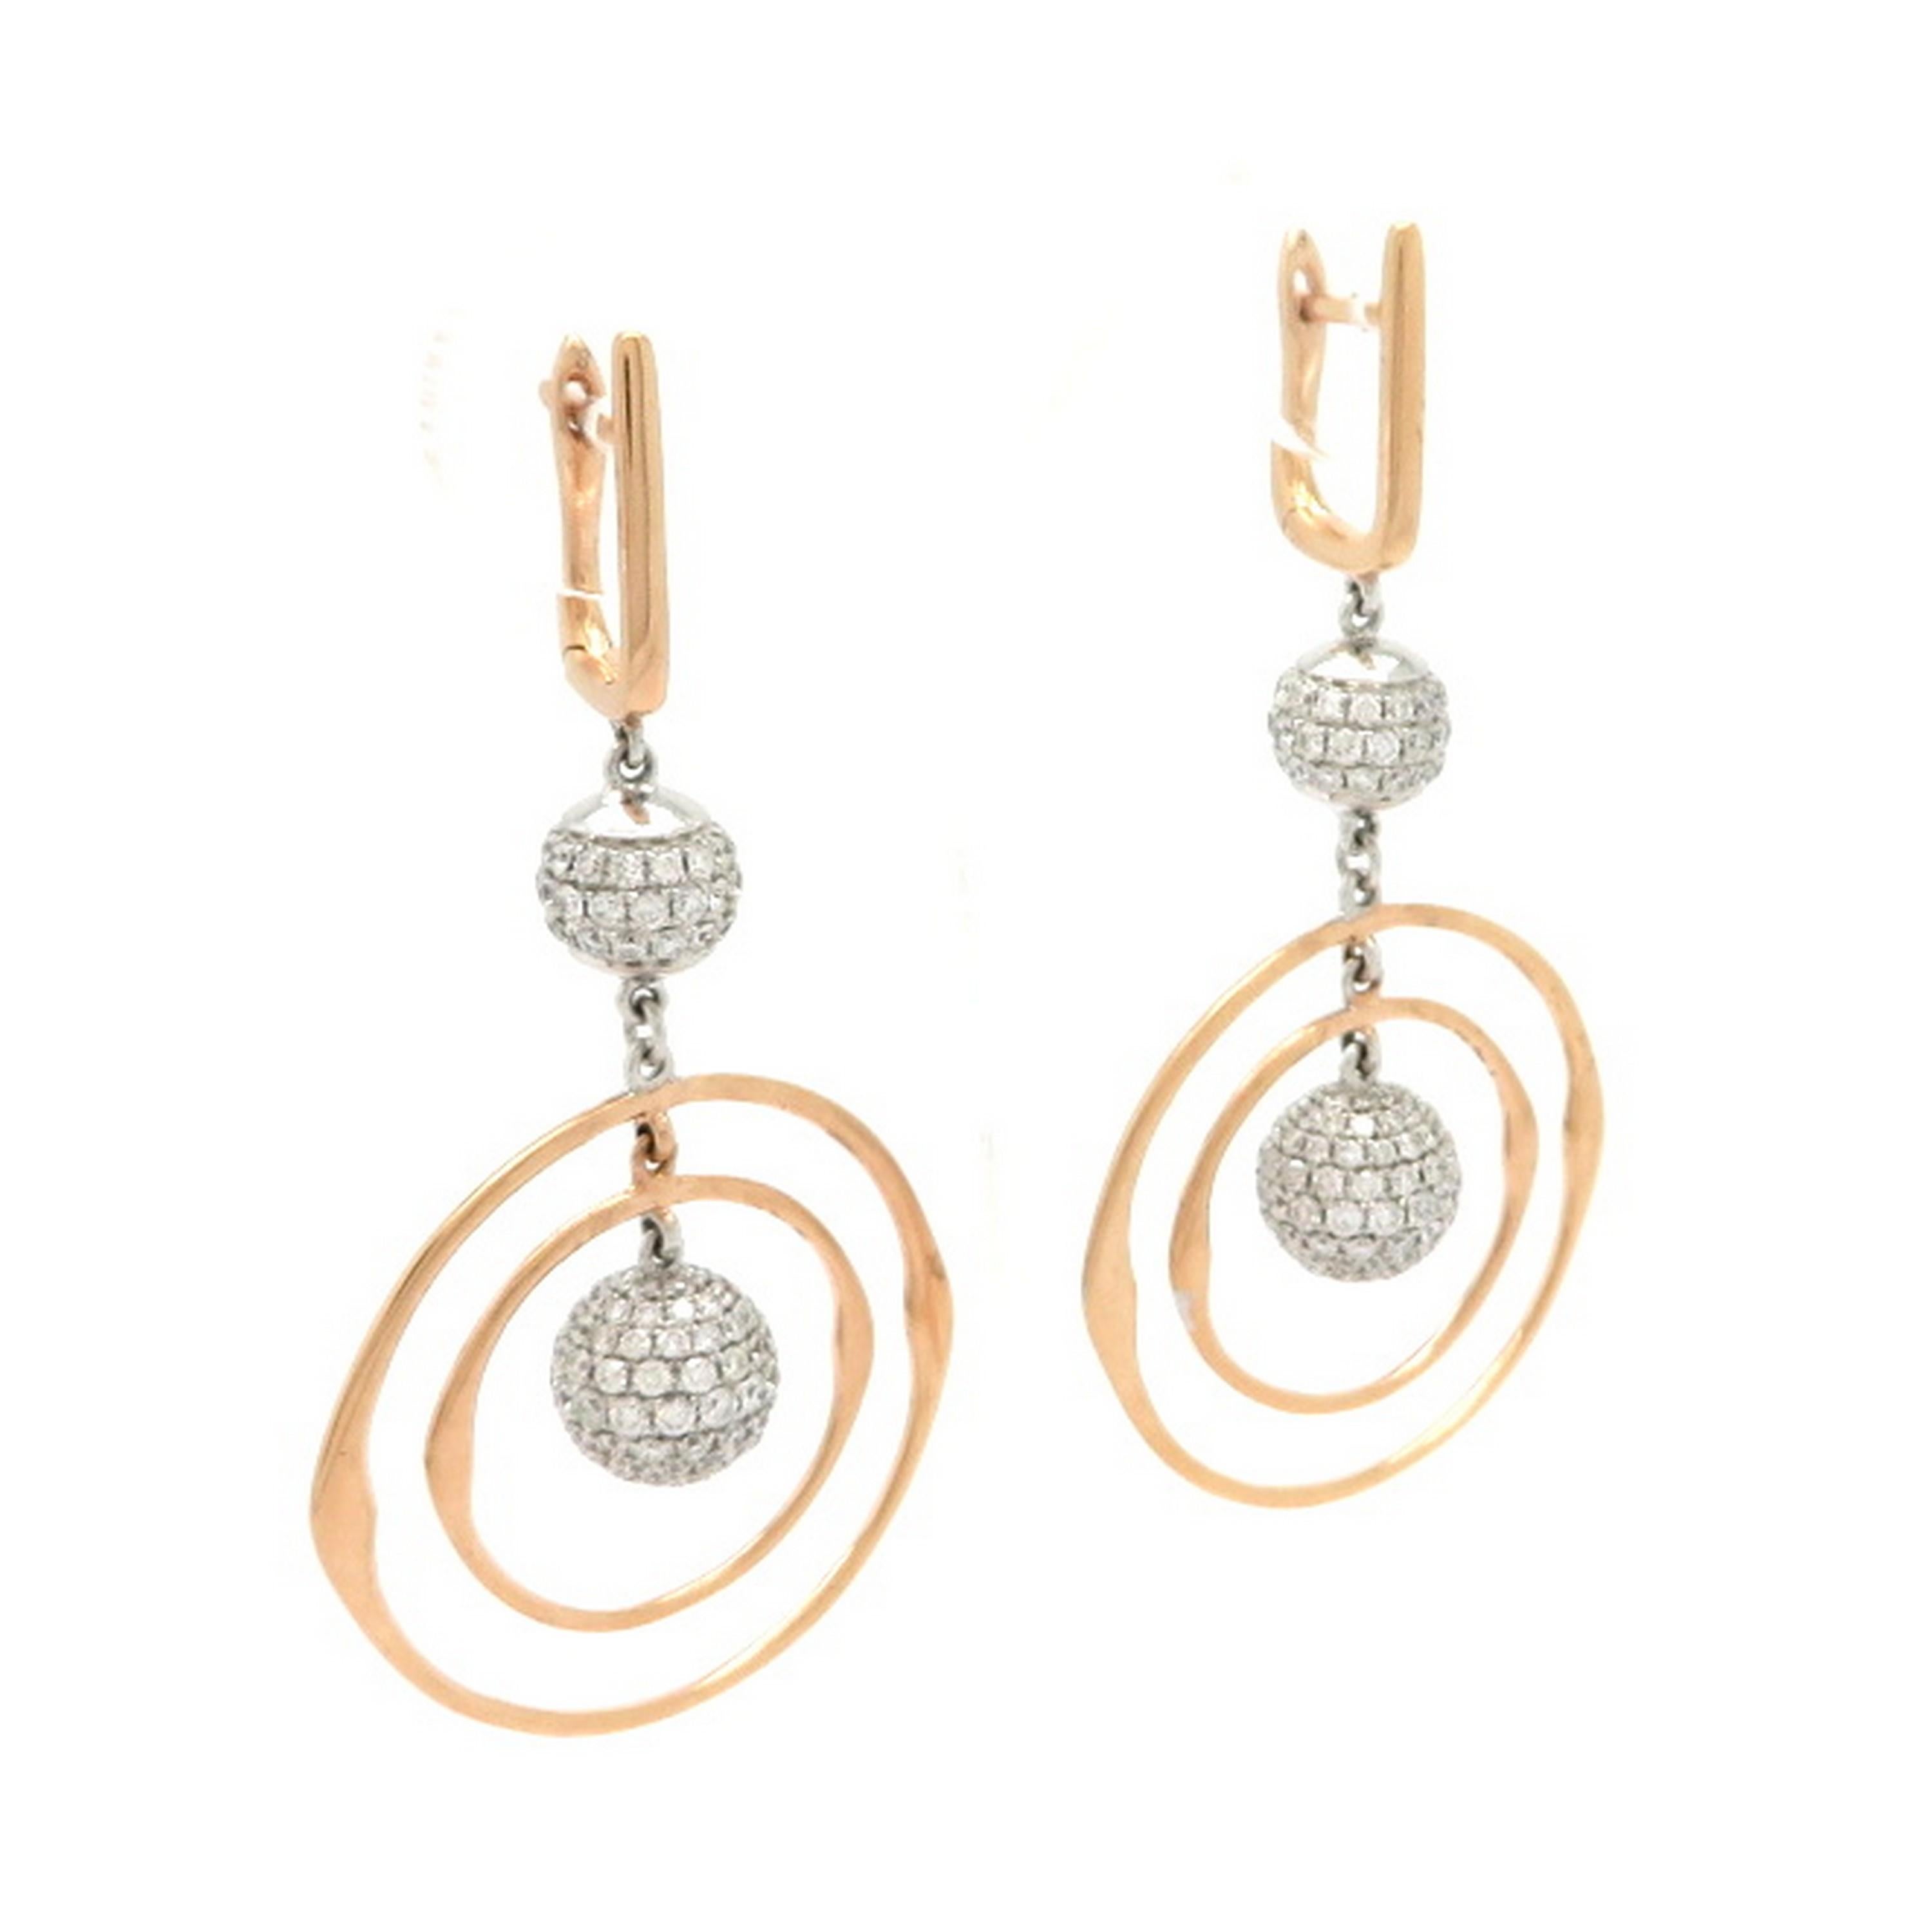 Estate 18K two-tone rose and white gold pave diamond circle earrings. Showcasing 308 pave set round brilliant cut diamonds, weighing a total of 3.01 carats. Diamond grading: color grade: H – I. Clarity grade: VS1. Each earring measures 2-1/8” inch